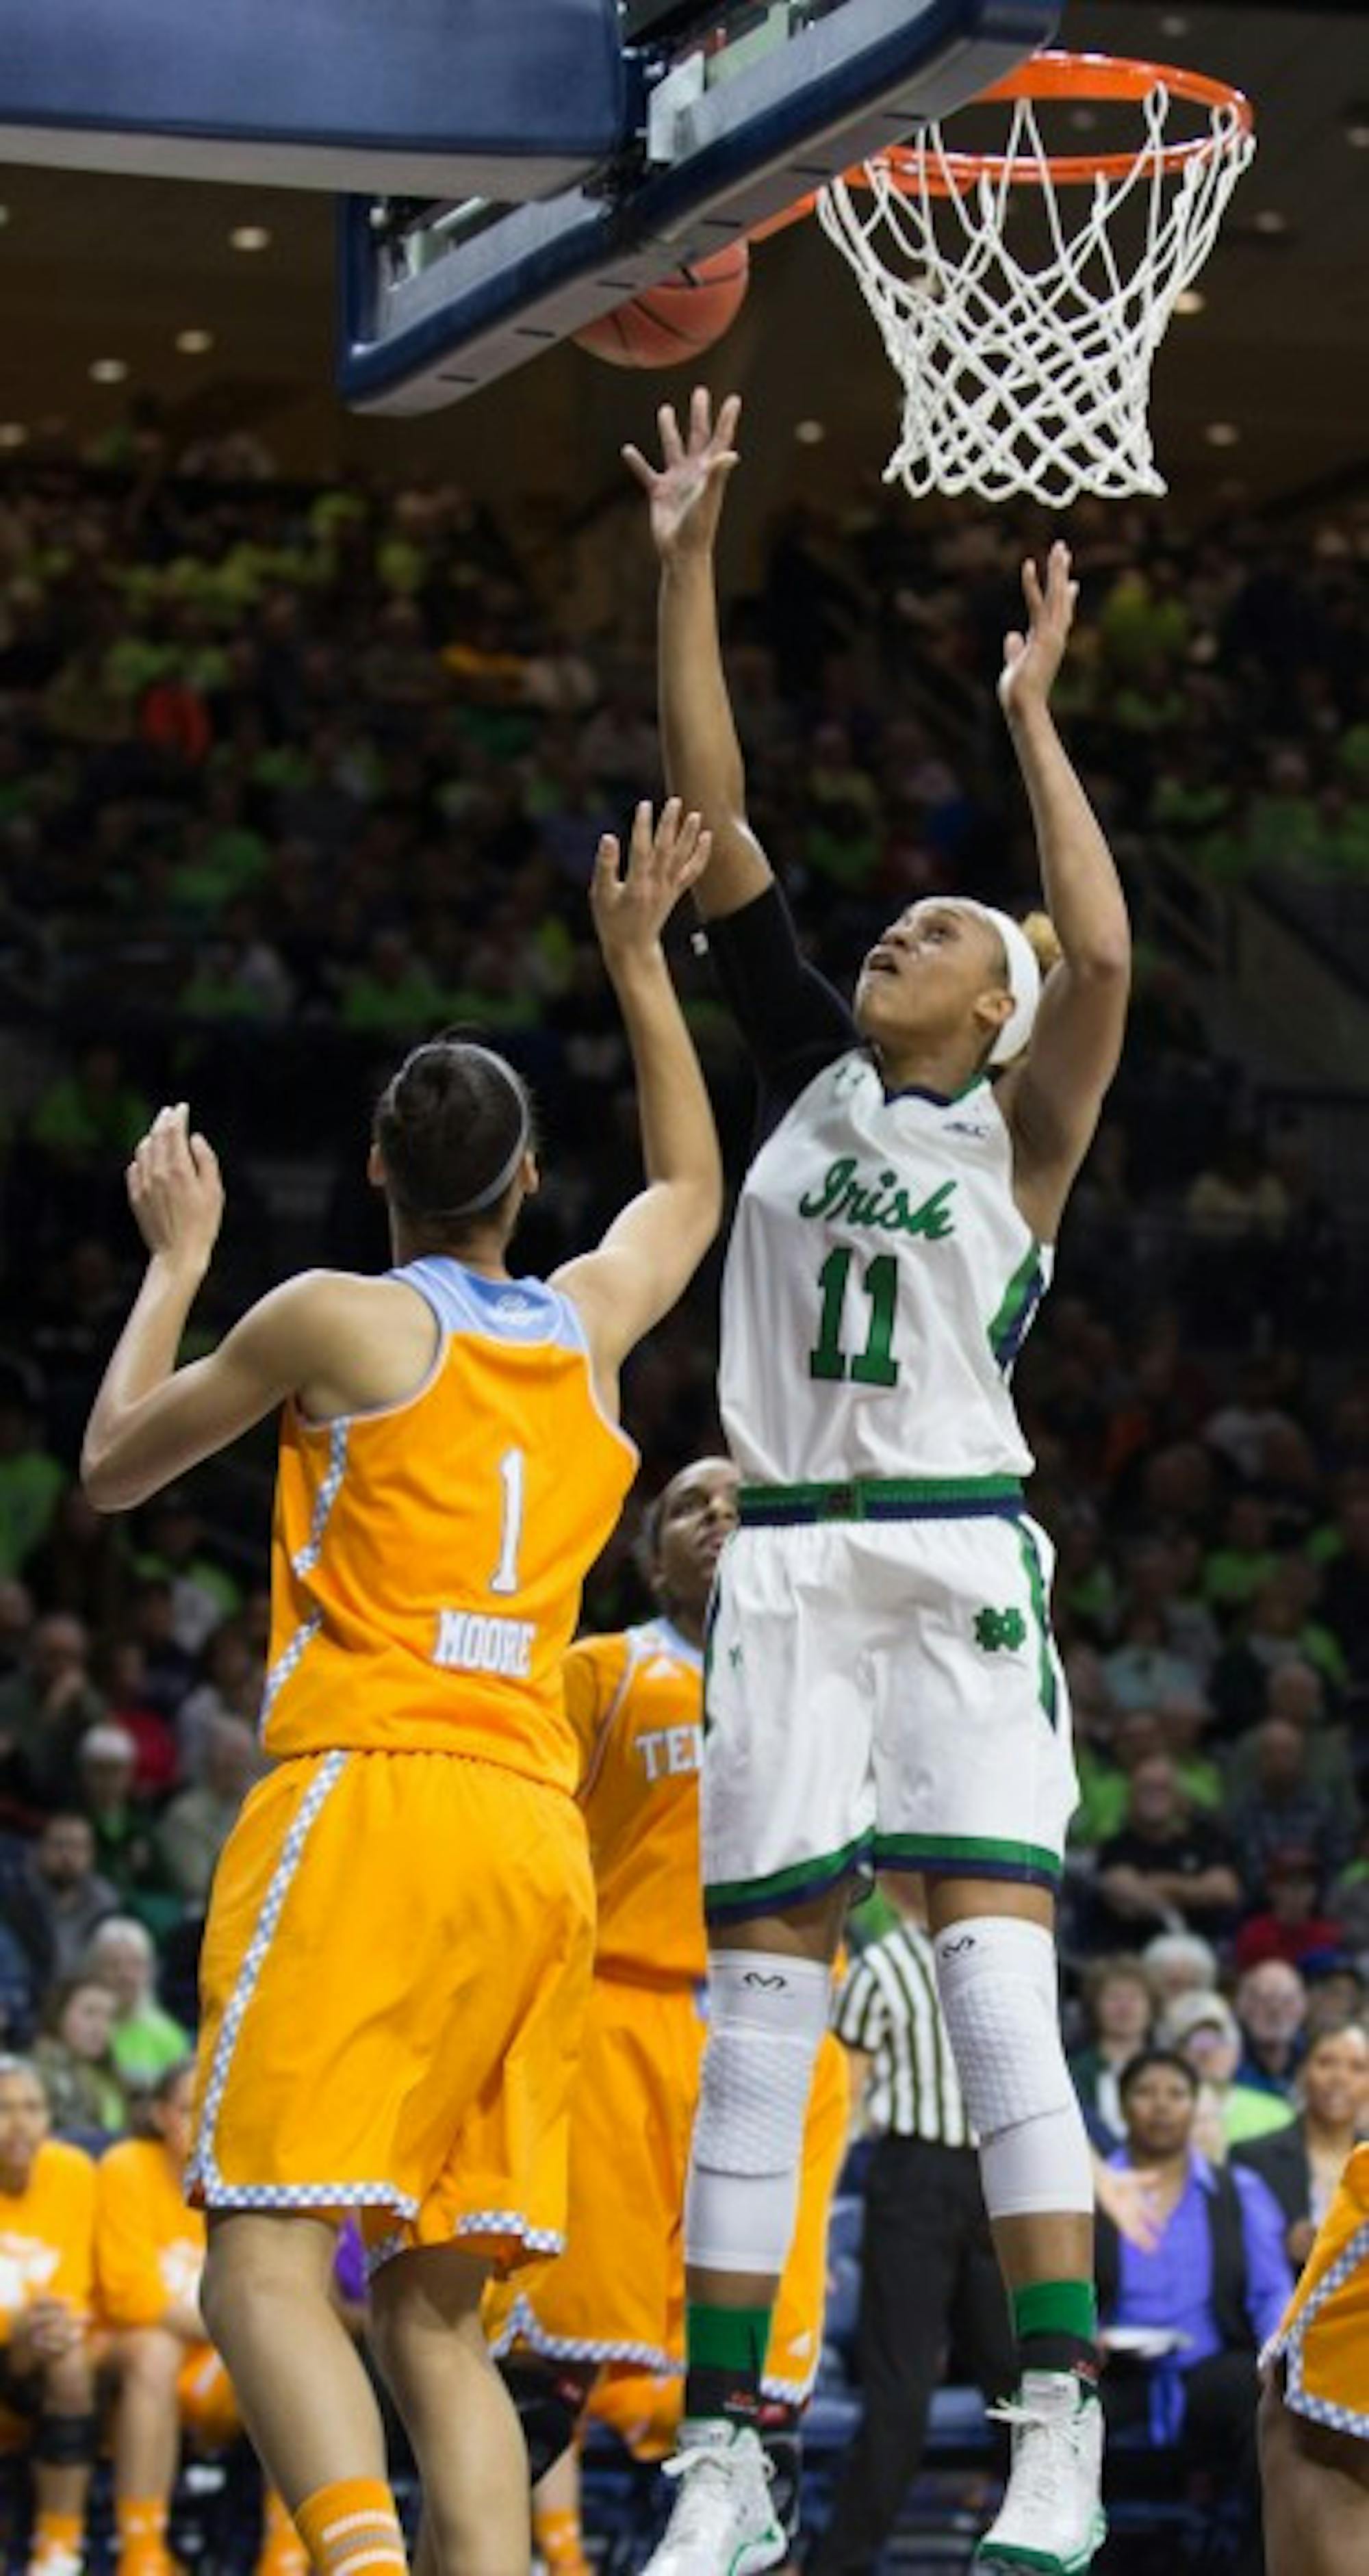 Irish freshman forward Brianna Turner goes up for a layup in Notre Dame’s 88-77 win over Tennessee on Monday at Purcell Pavilion.